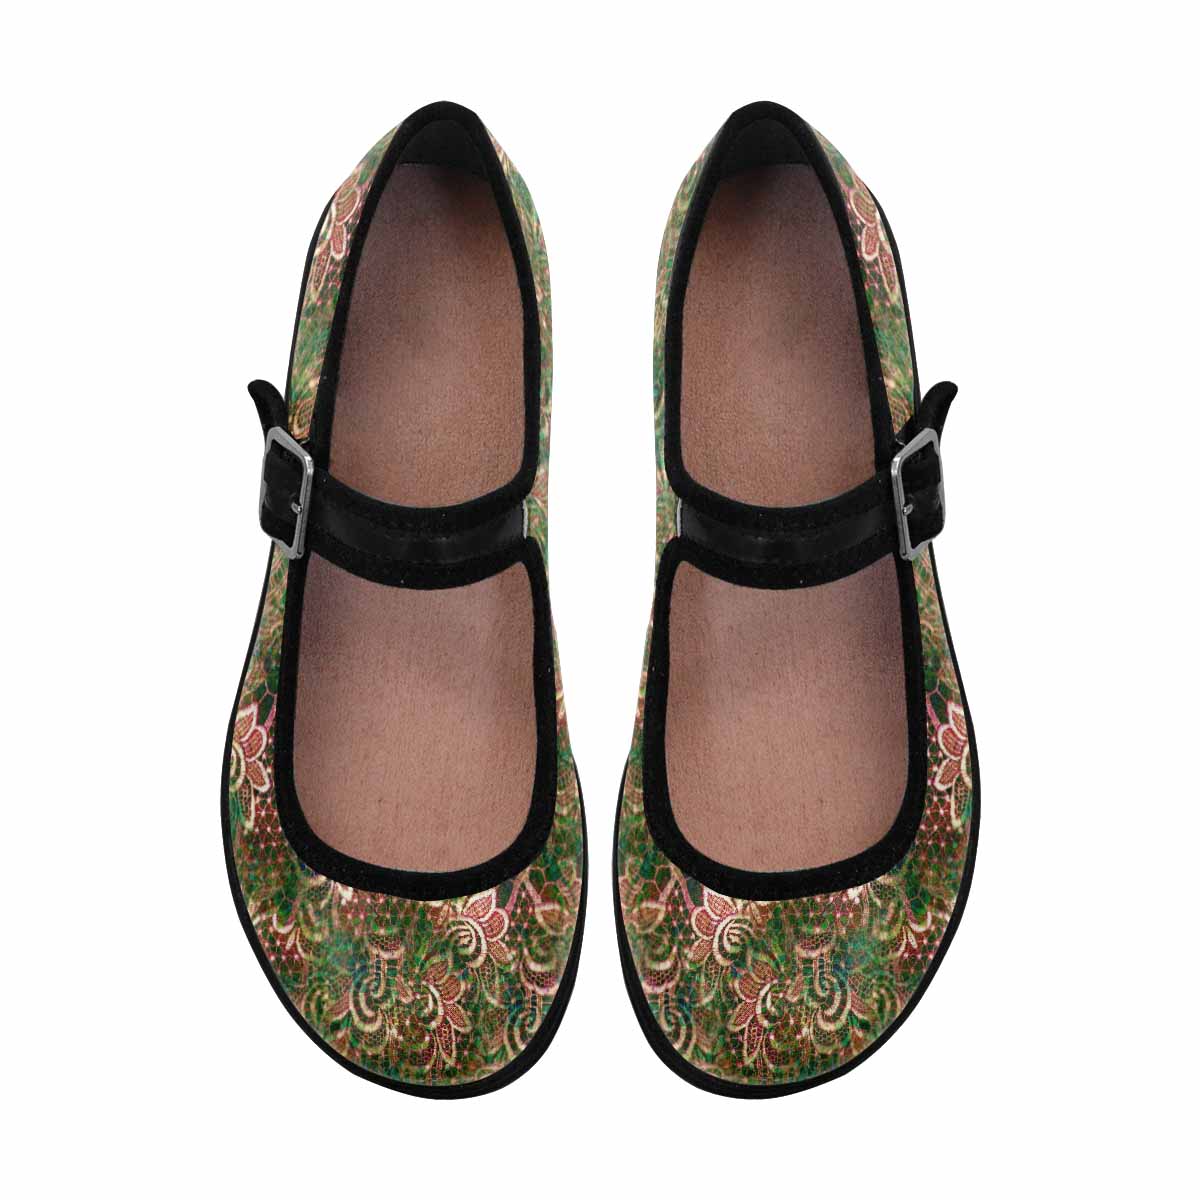 Victorian lace print, cute, vintage style women's Mary Jane shoes, design 34